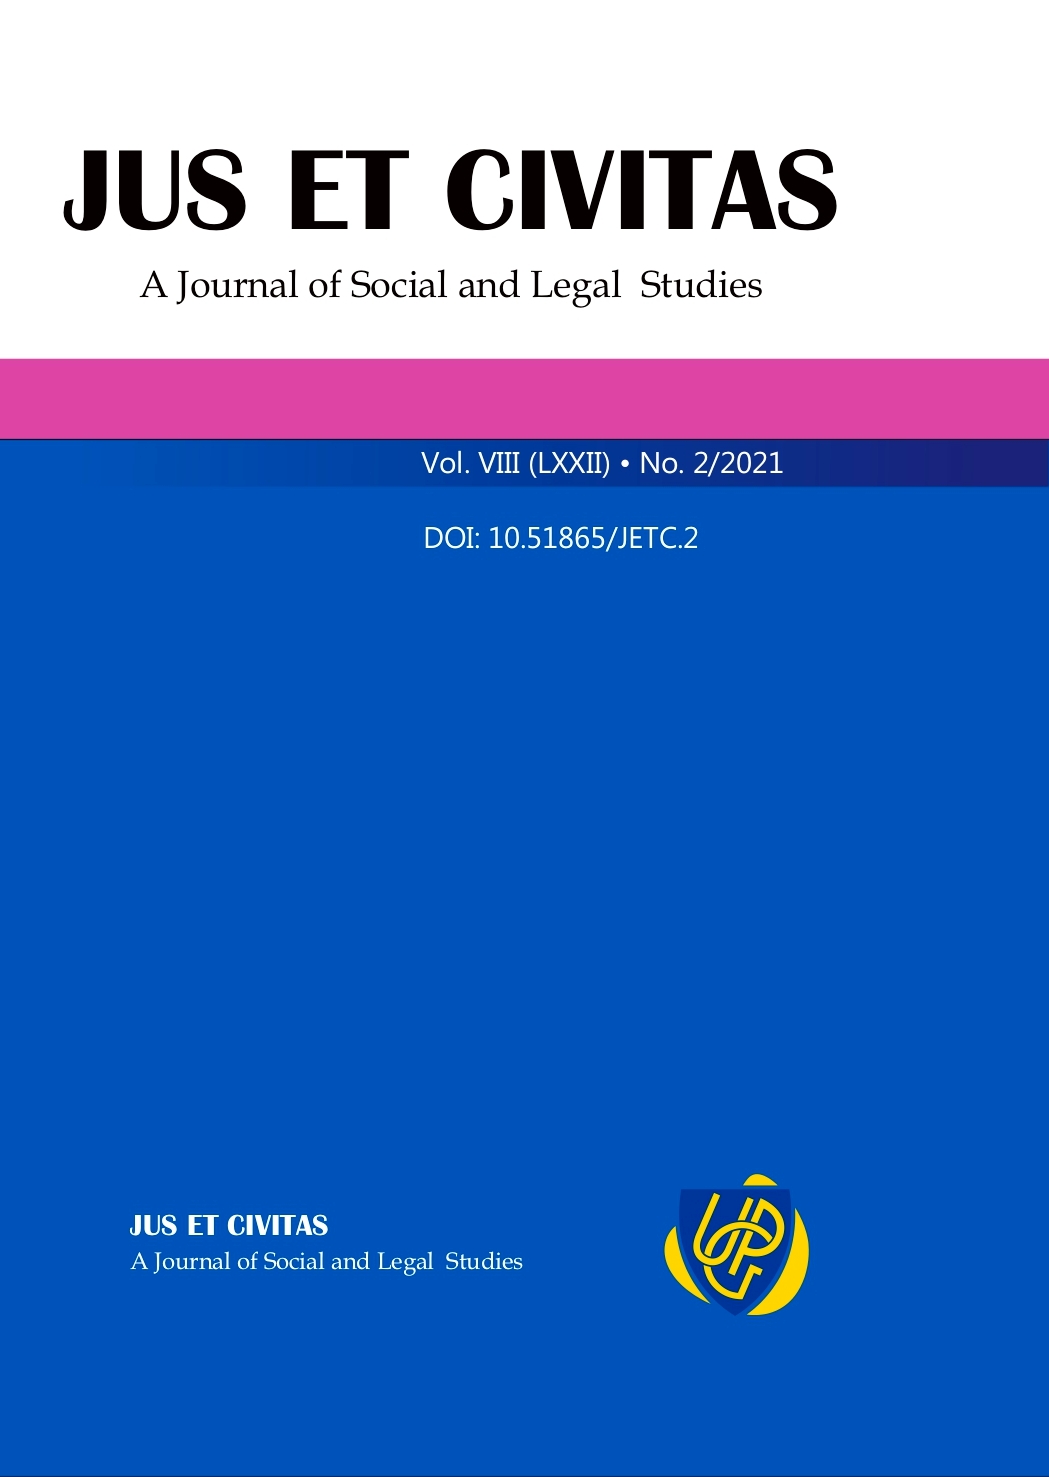 ALTERNATIVE DISPUTE RESOLUTION AND INDIVIDUAL LABOUR CONFLICTS: A DIFFERENT WAY OF MANAGING ORGANIZATIONAL DISPUTES